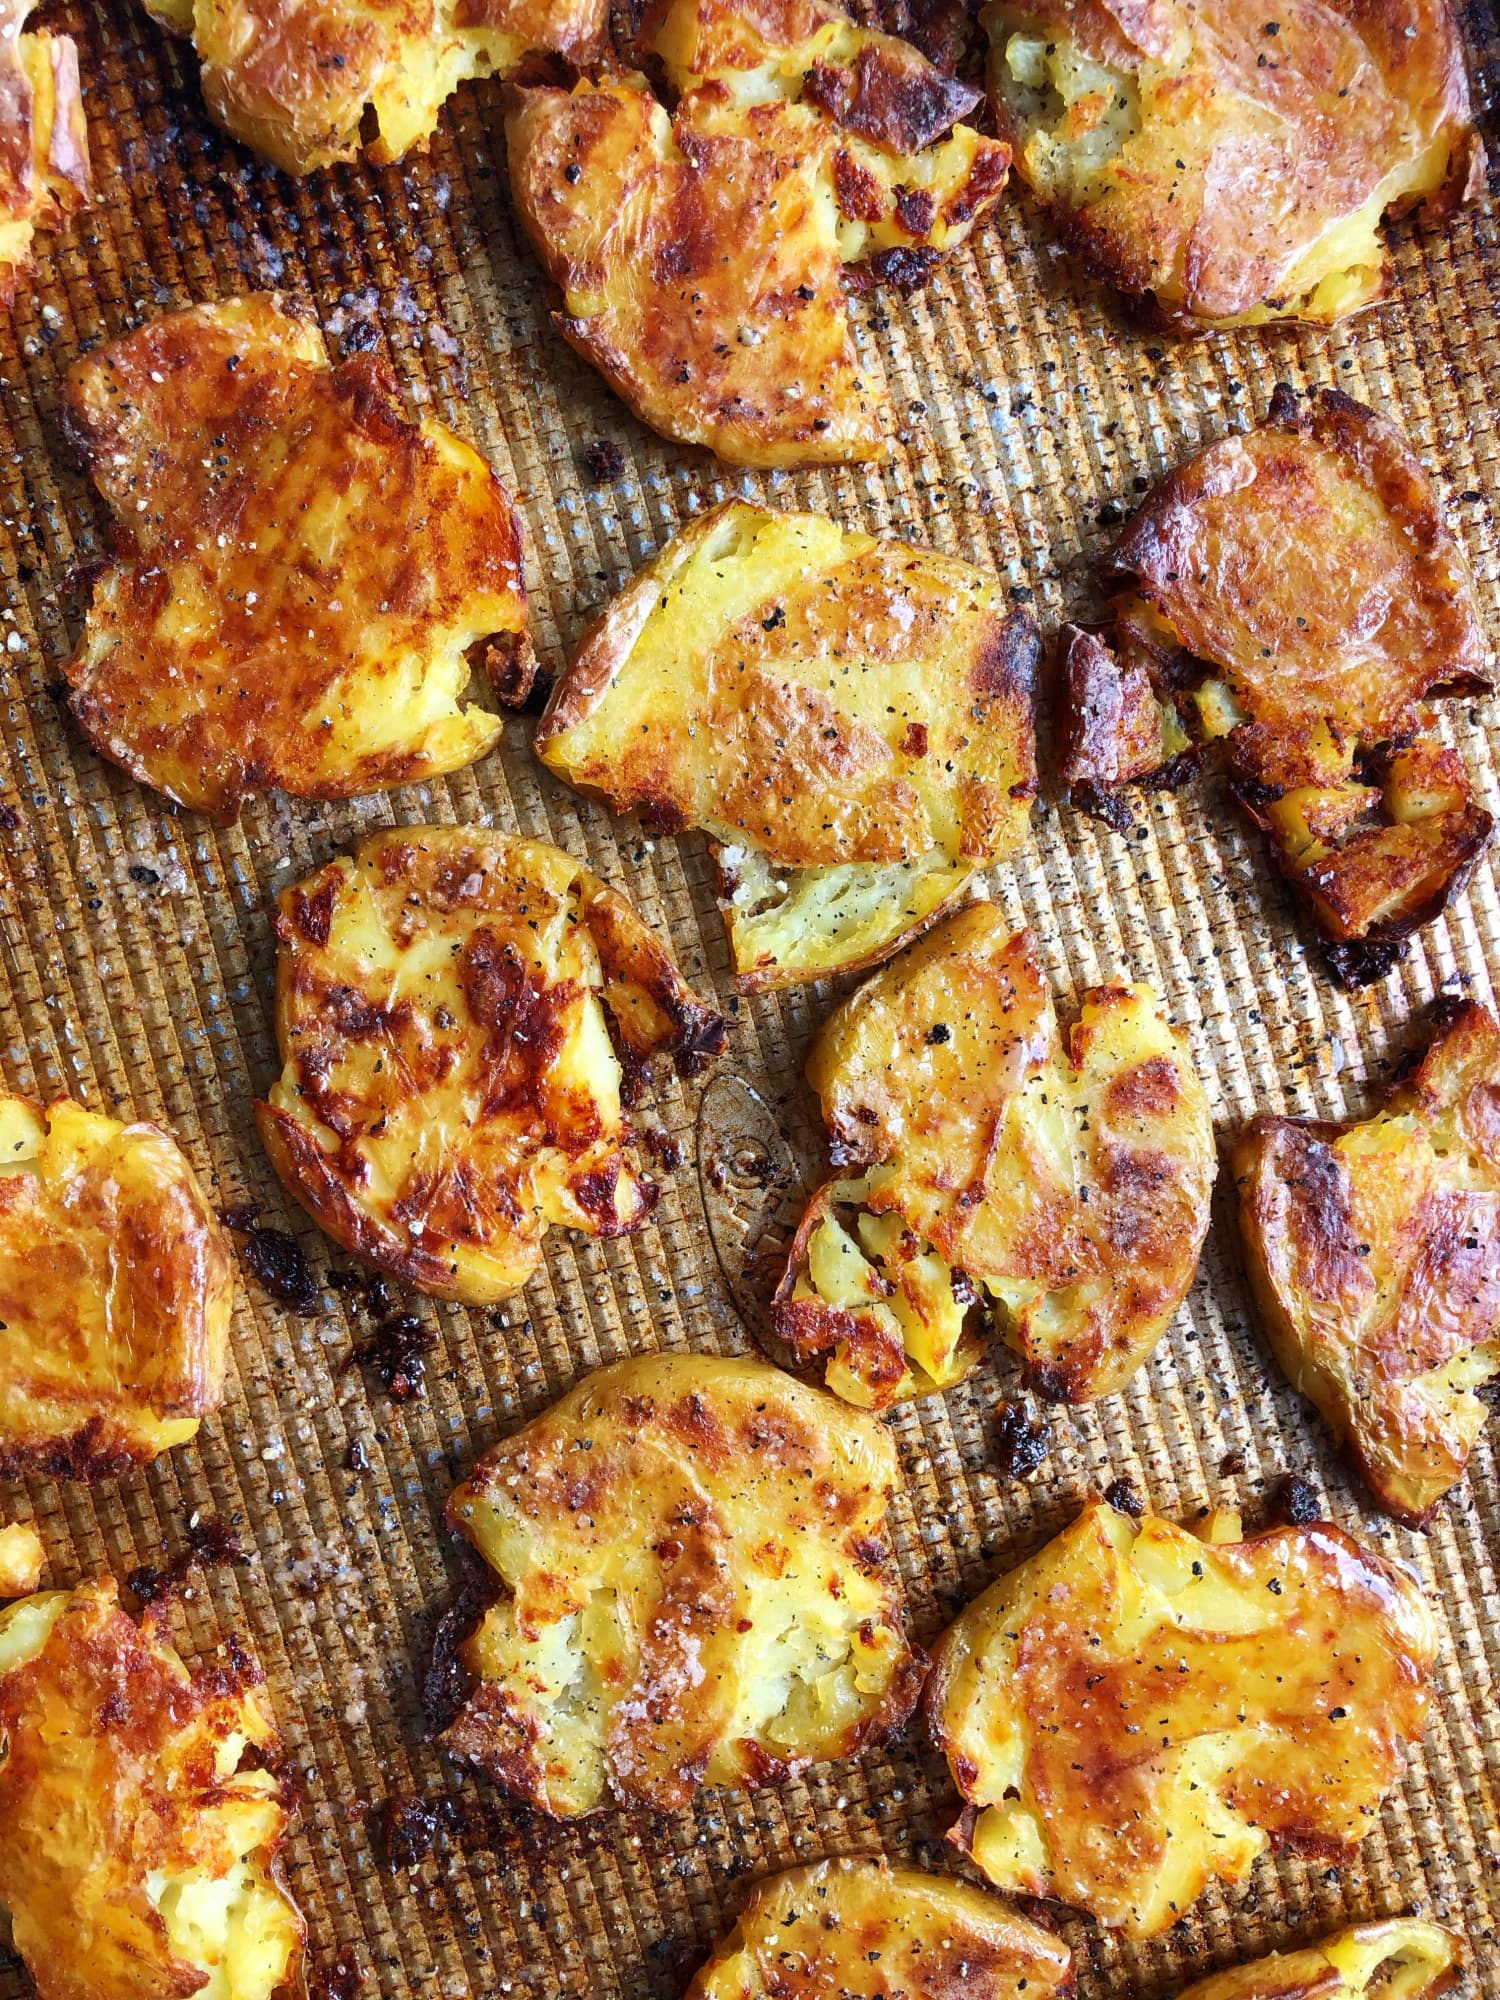 I Tried The Viral Crispy Smashed Lemon Potatoes (I Could Eat Them Every Day)